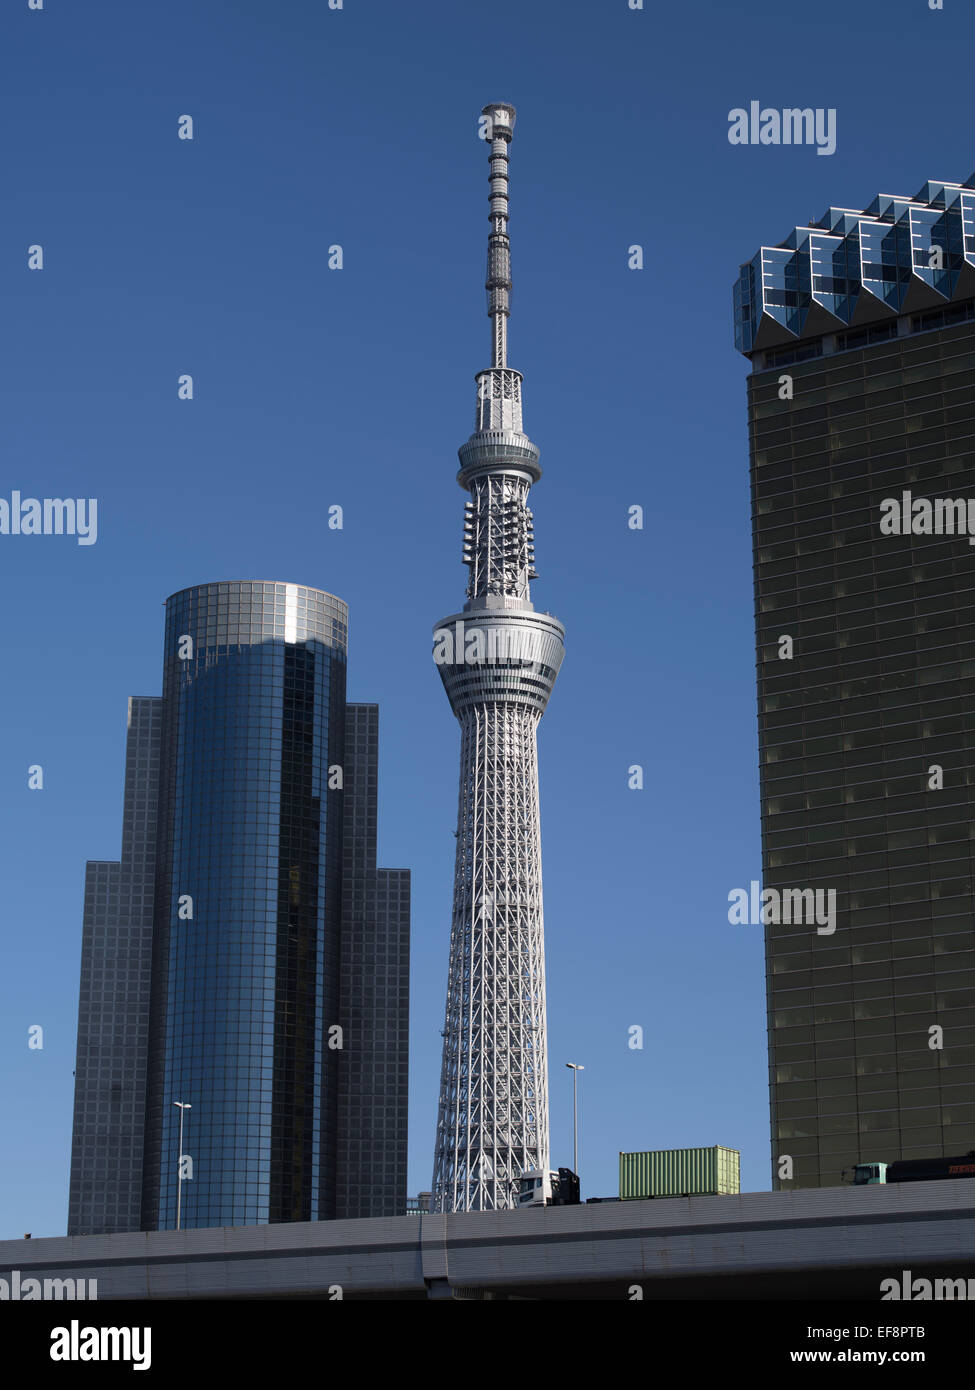 Tokyo Skytree, at 634m the world's tallest free-standing broadcasting tower. Stock Photo